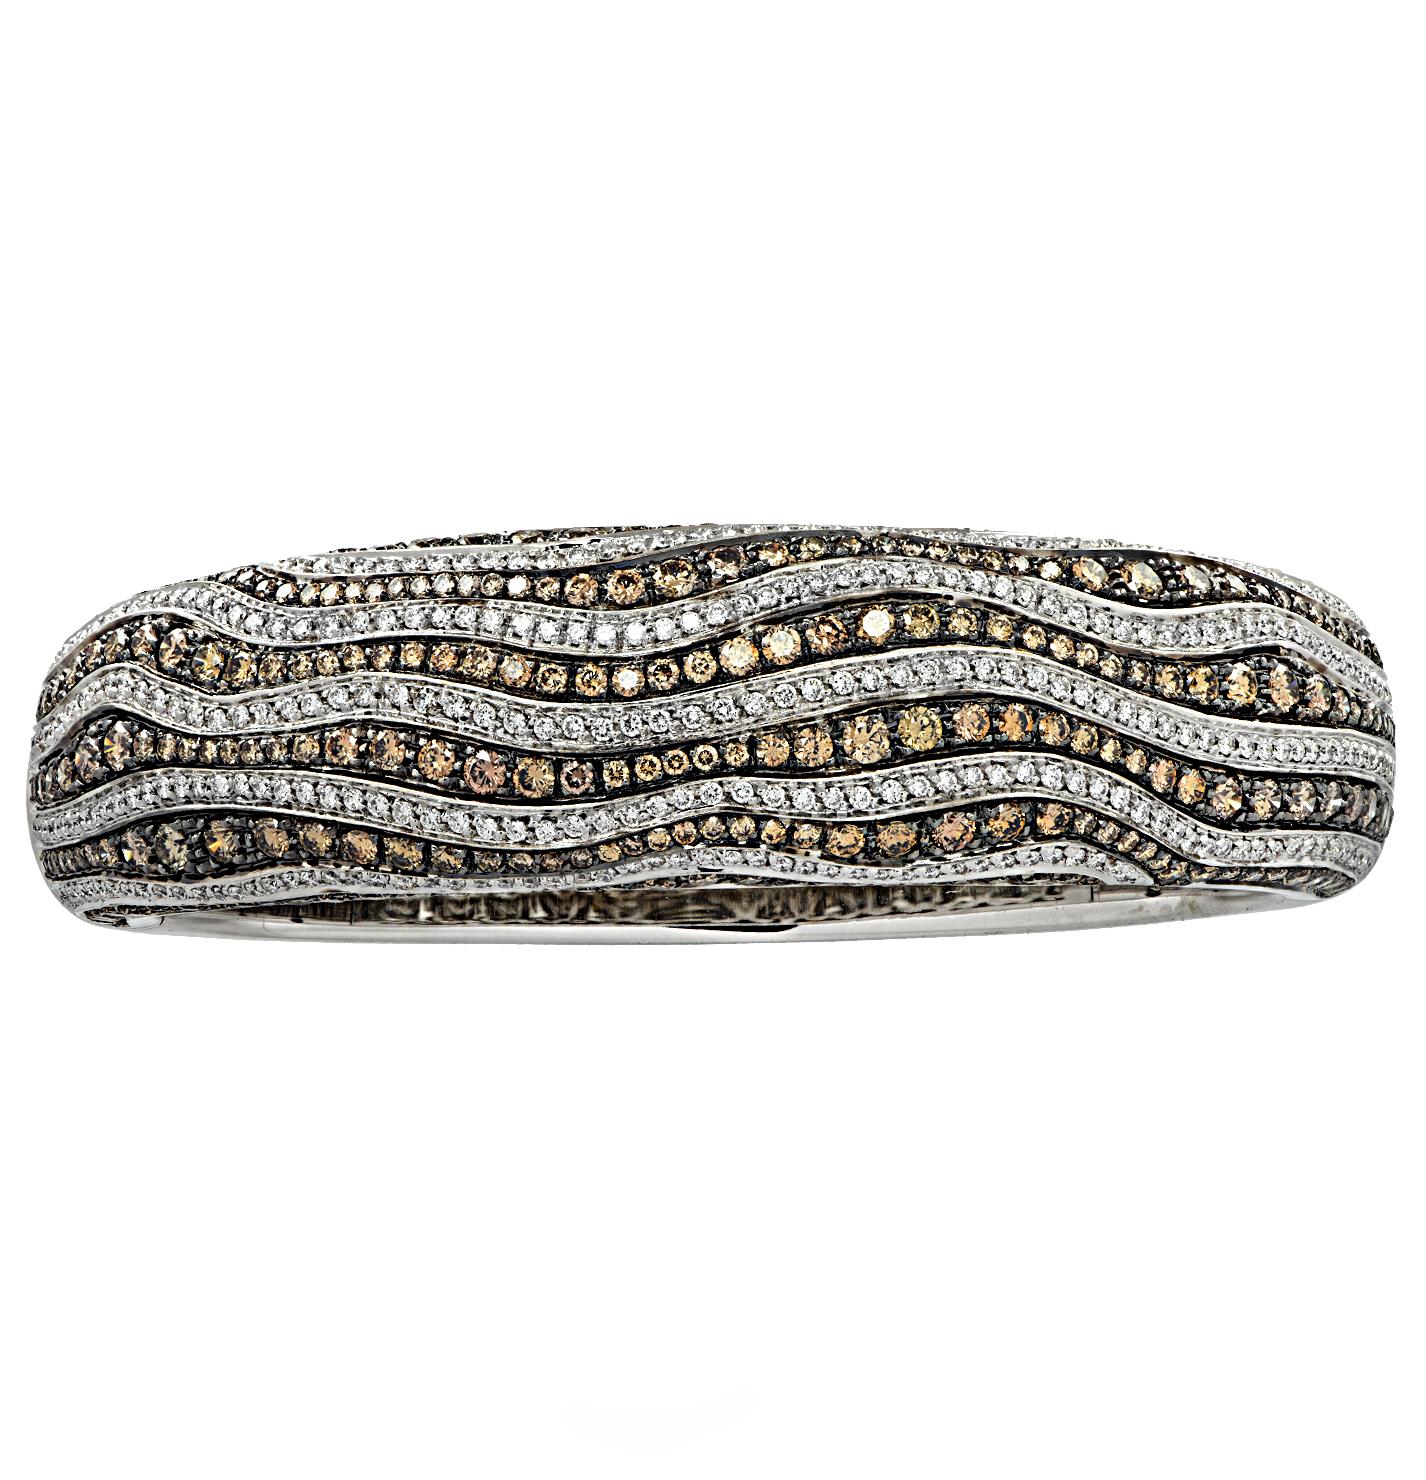 Stunning Leo Pizzo bangle bracelet crafted in 18 karat white gold with black rhodium featuring 630 mixed brown and white diamonds weighing approximately 7 carats total. 350 round brilliant cut diamonds weighing approximately 2 carats total, G color,